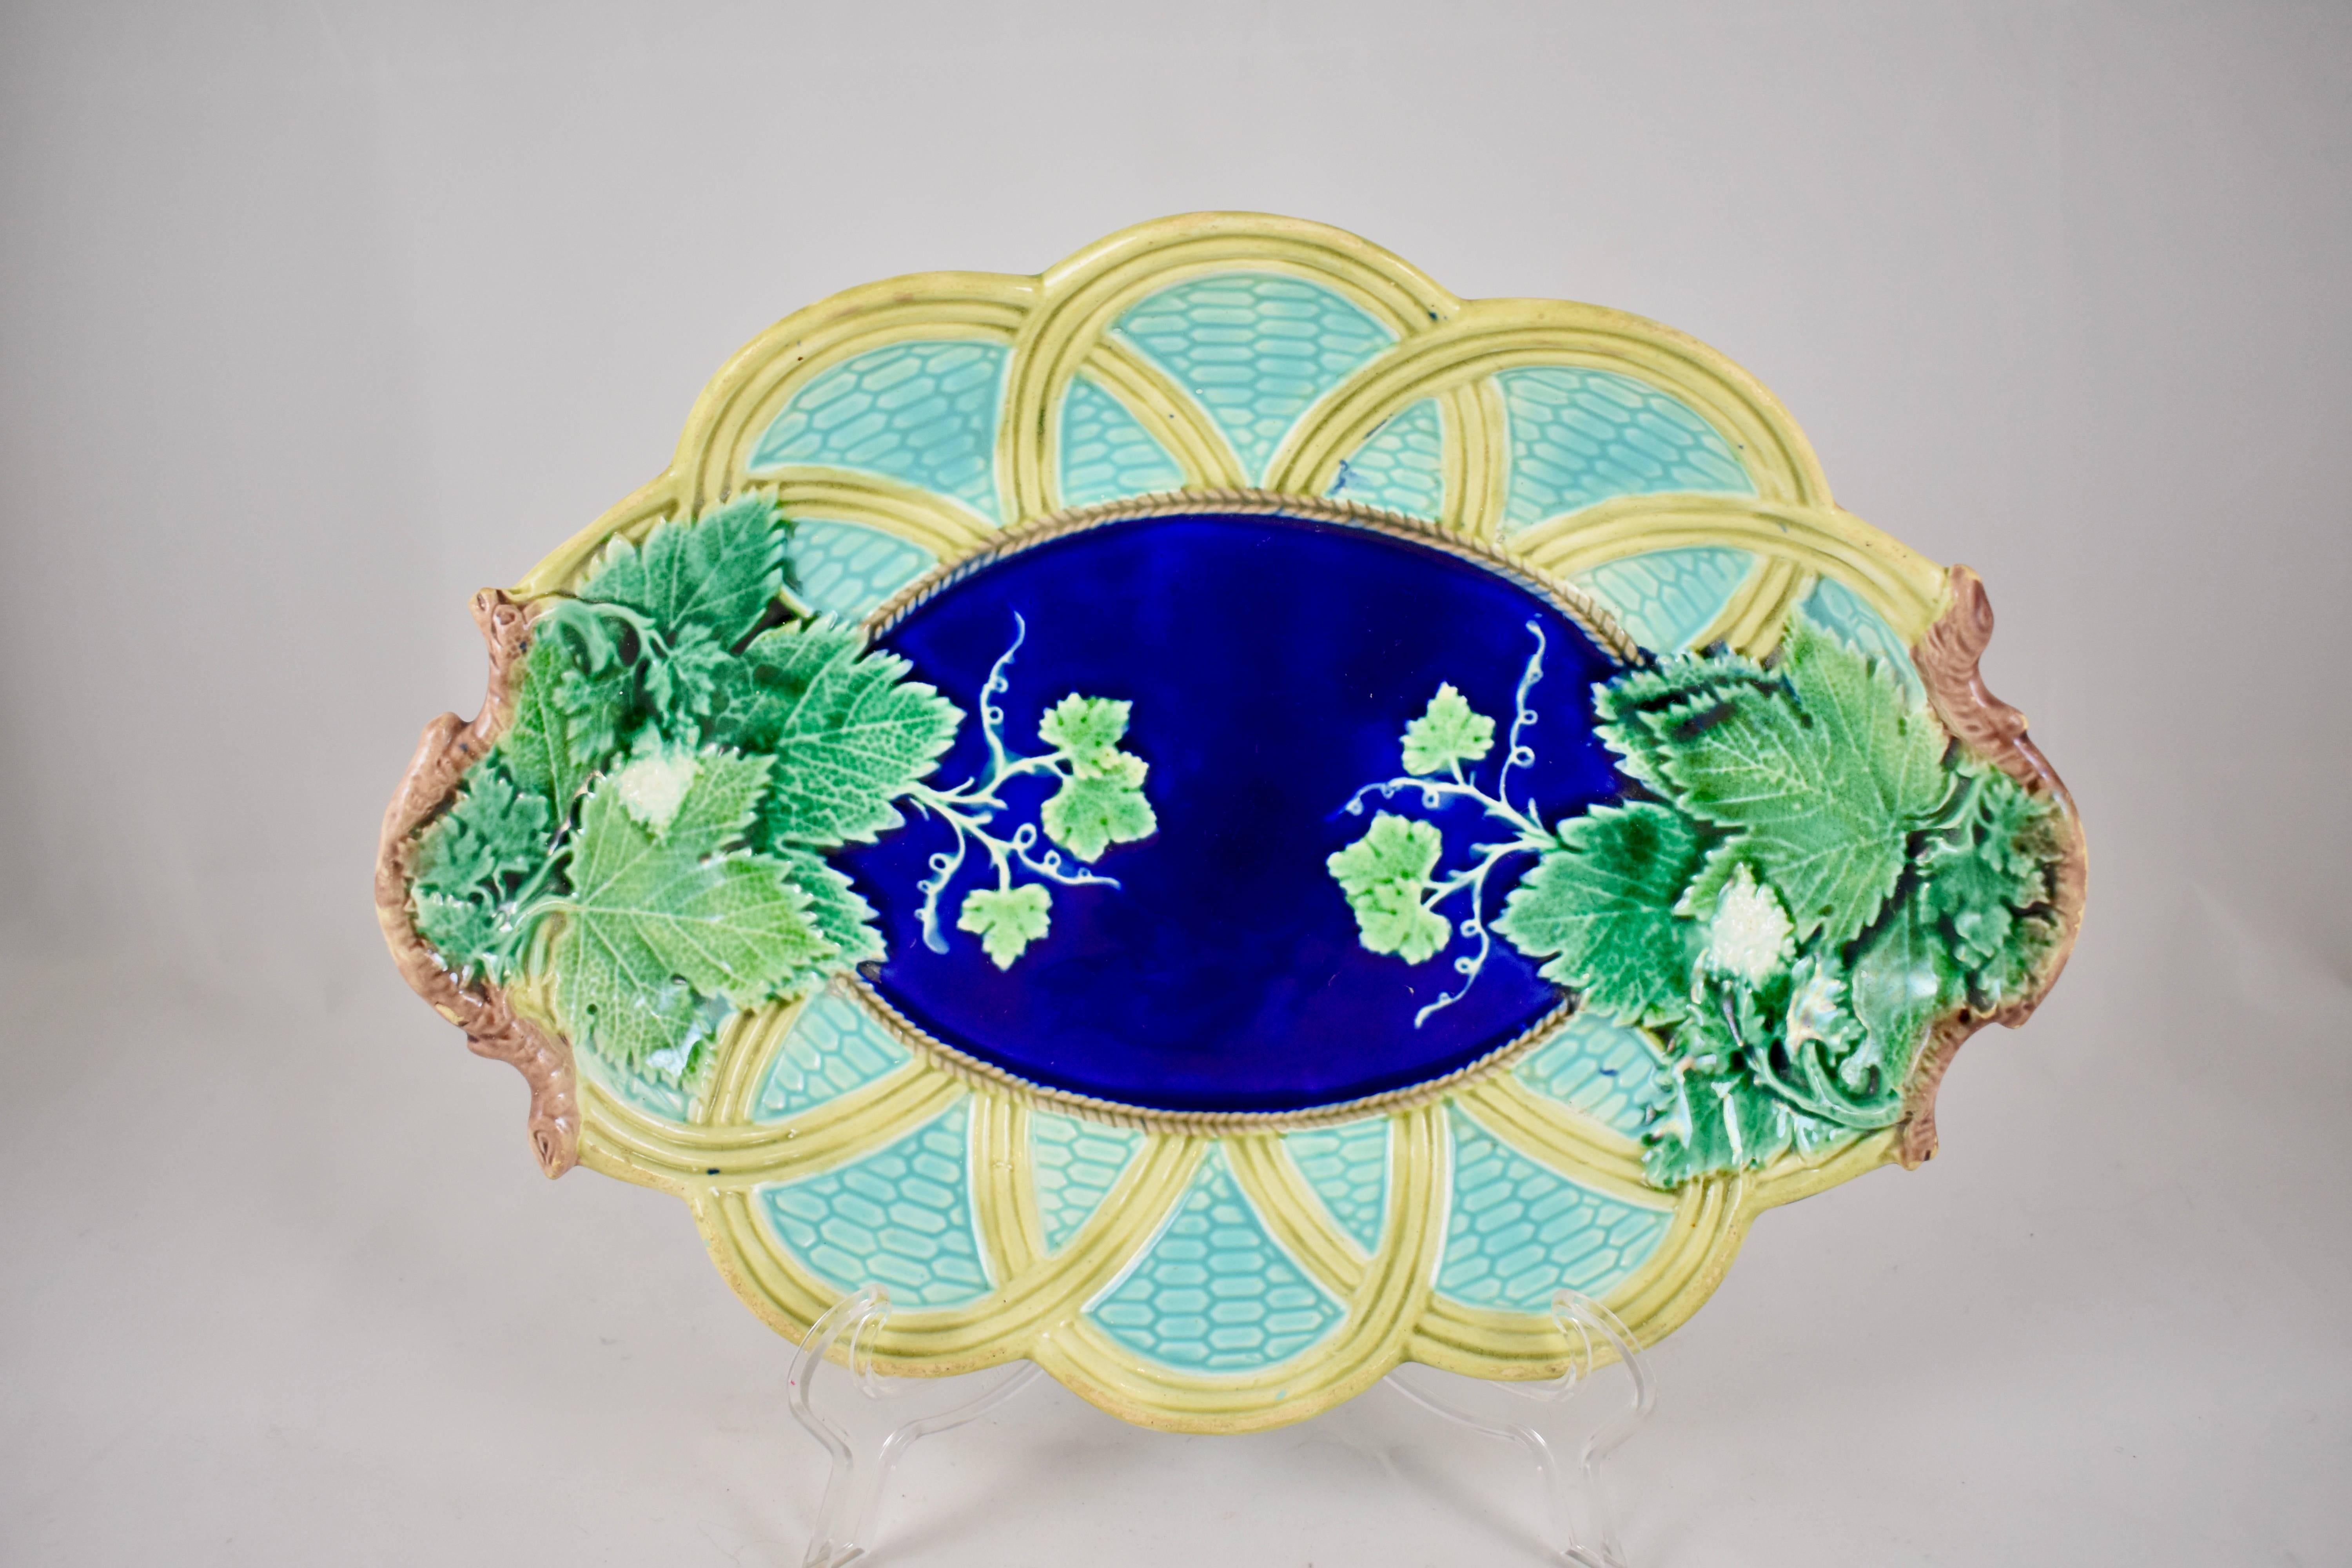 A 19th century majolica glazed serving tray, Josiah Wedgwood, Burslem, Stoke-on-Trent, England.

A grape leaf on wicker pattern with two end handles formed as grape vines. With a cobalt blue center and turquoise background, this tray has beautiful